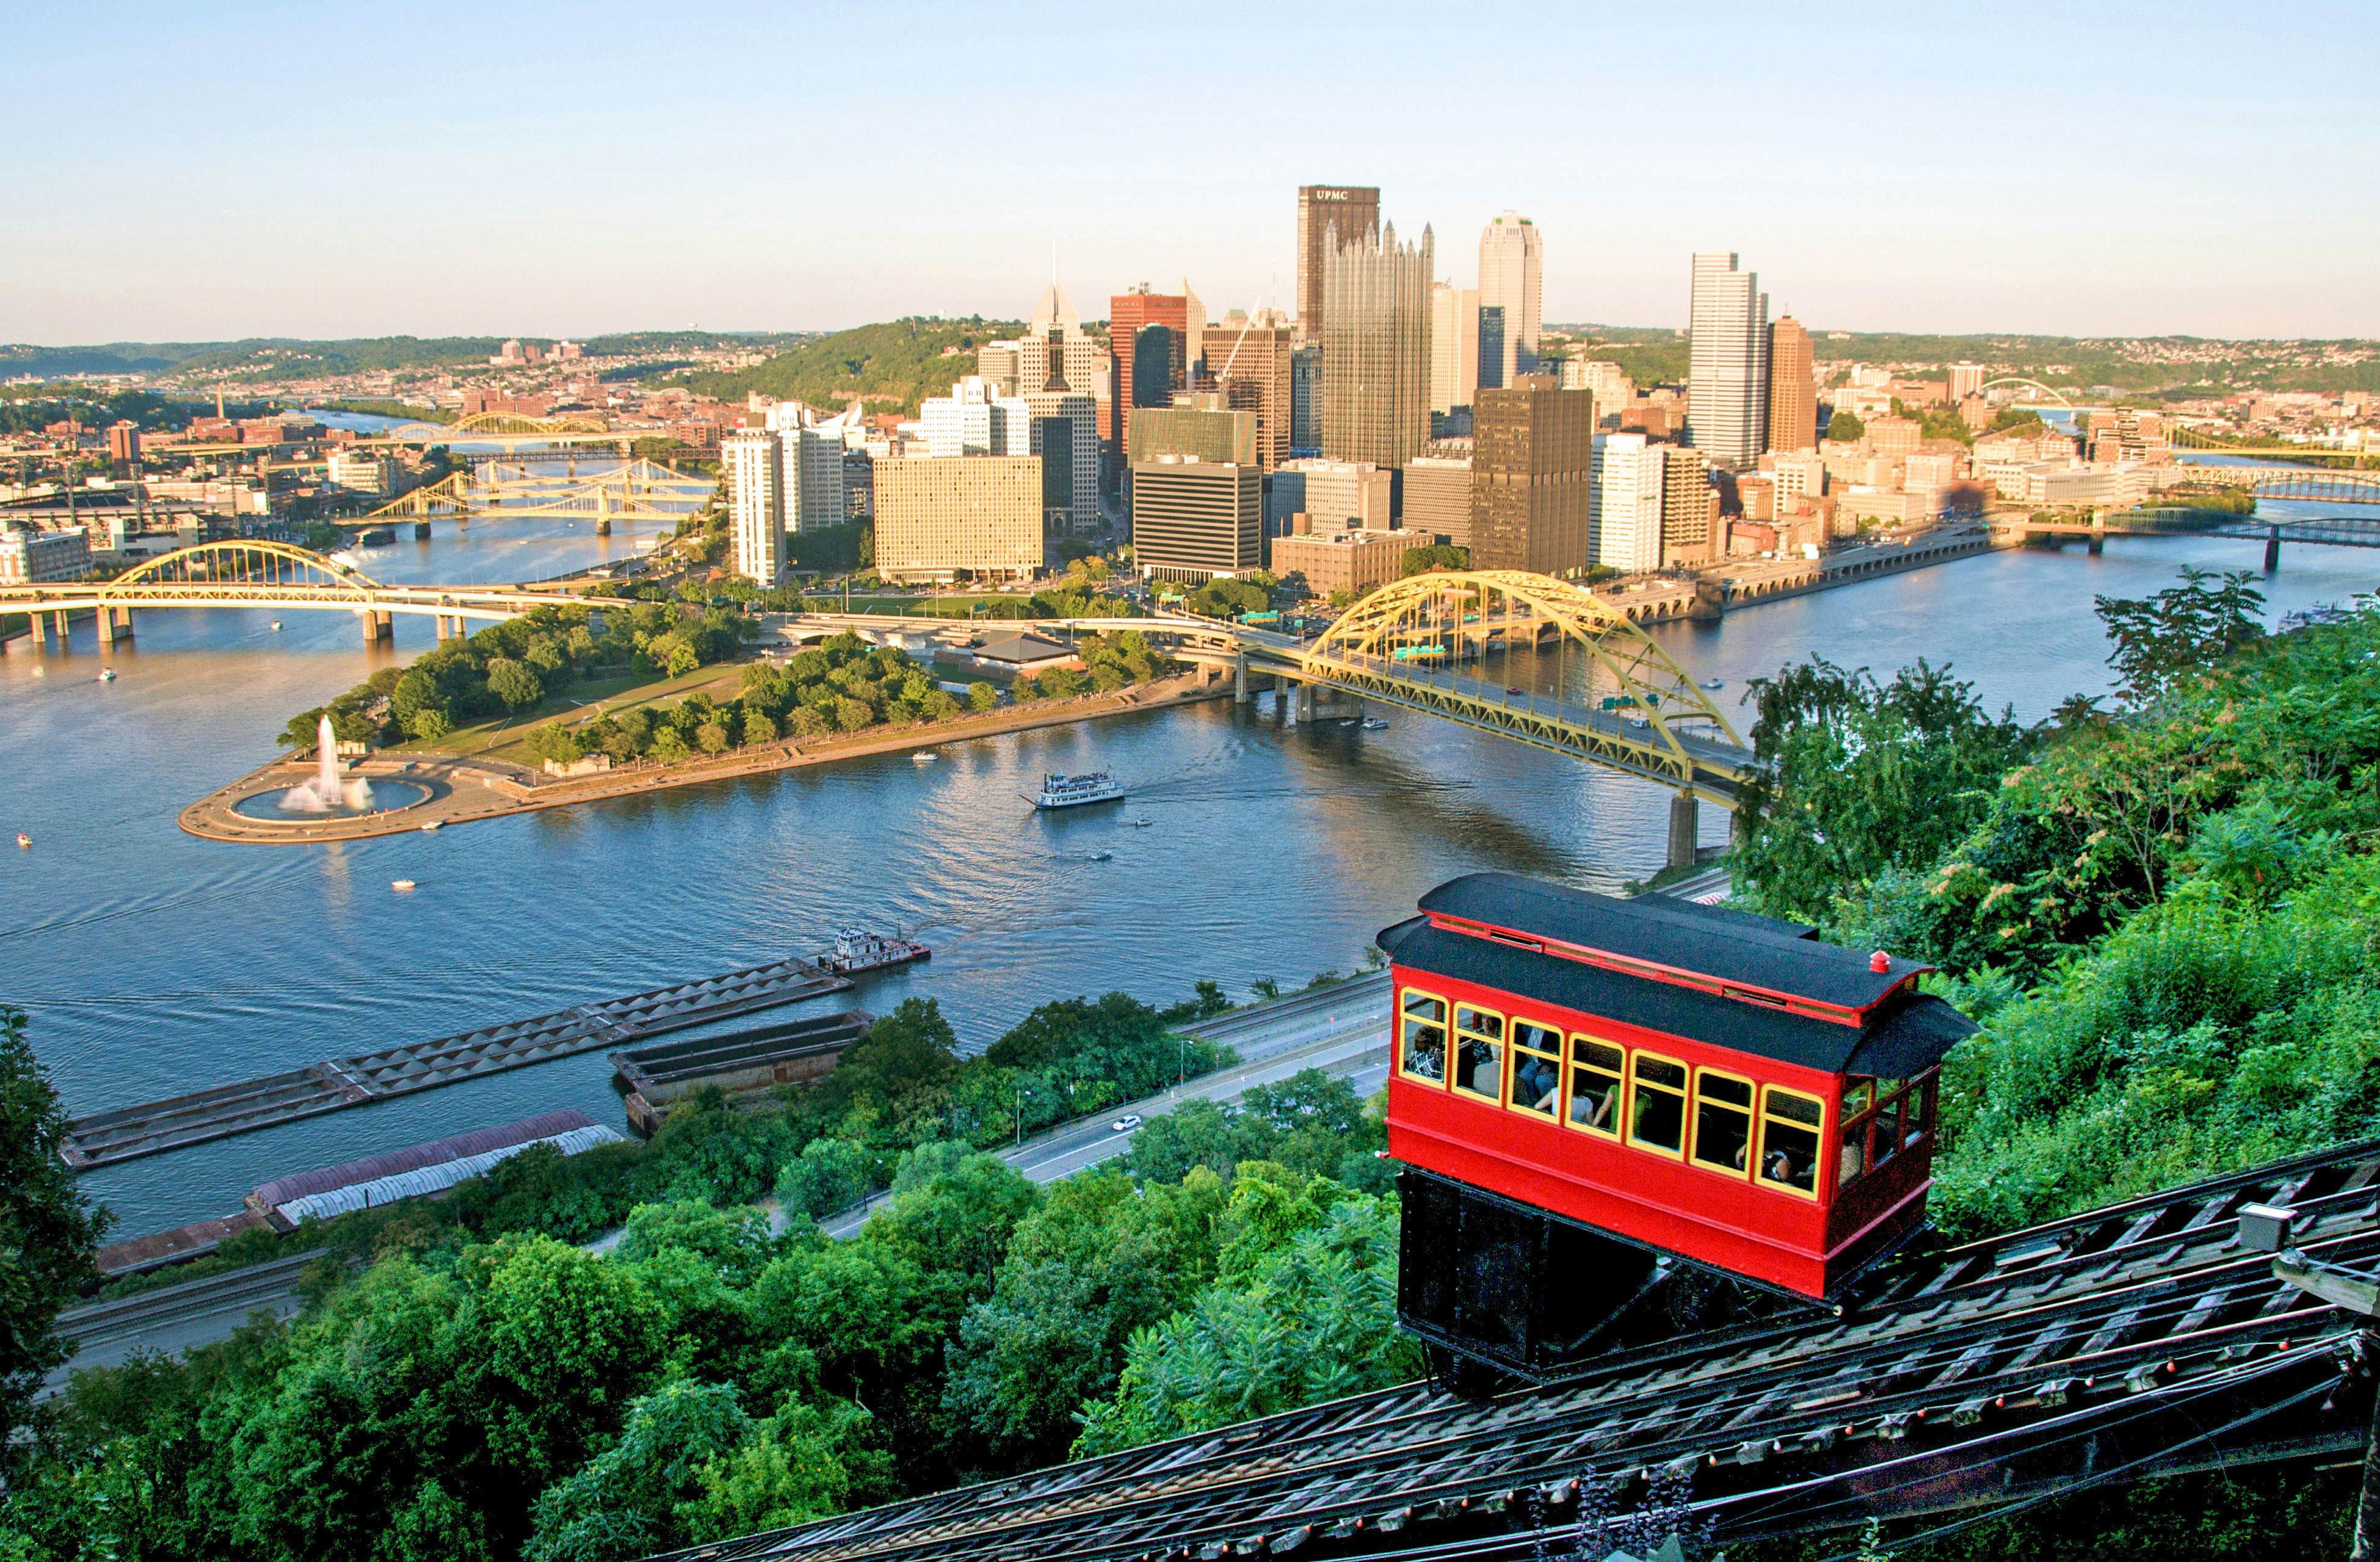 Pittsburgh, Pennsylvania – Tourism, Attractions and Things to Do